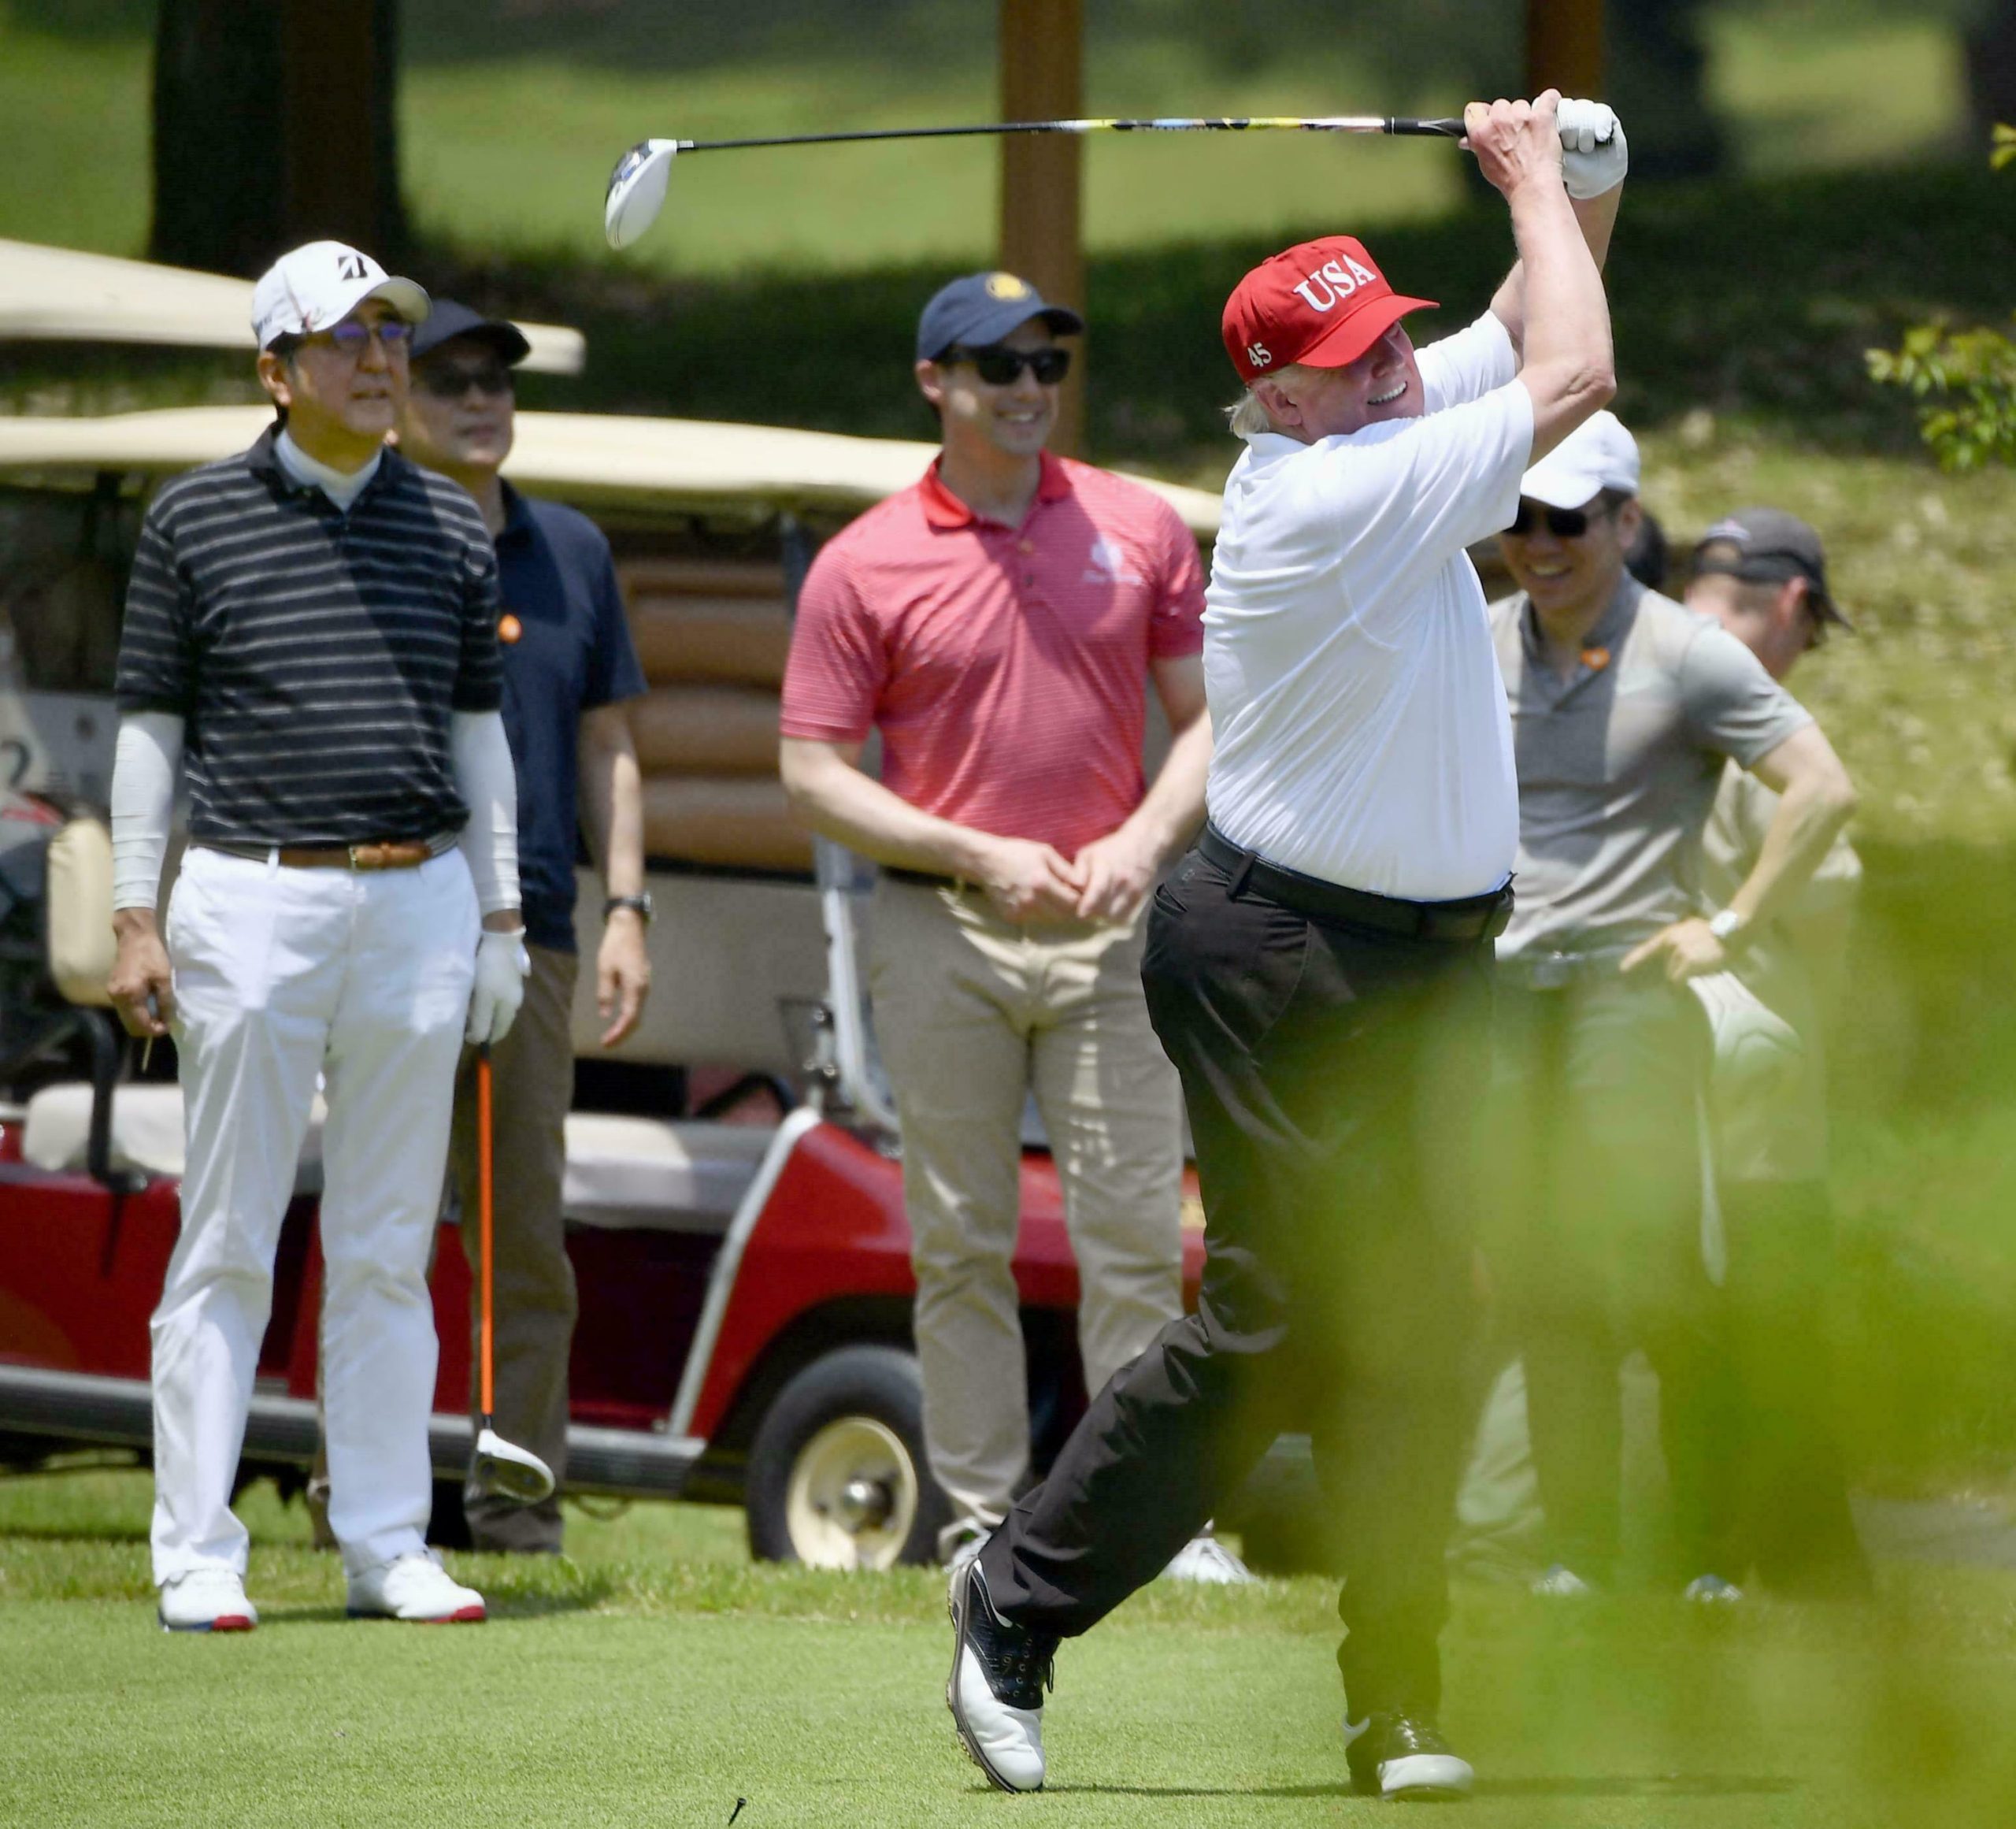 Federal officials looking to recover $7,000 set of gold-plated golf clubs Donald Trump received as gift